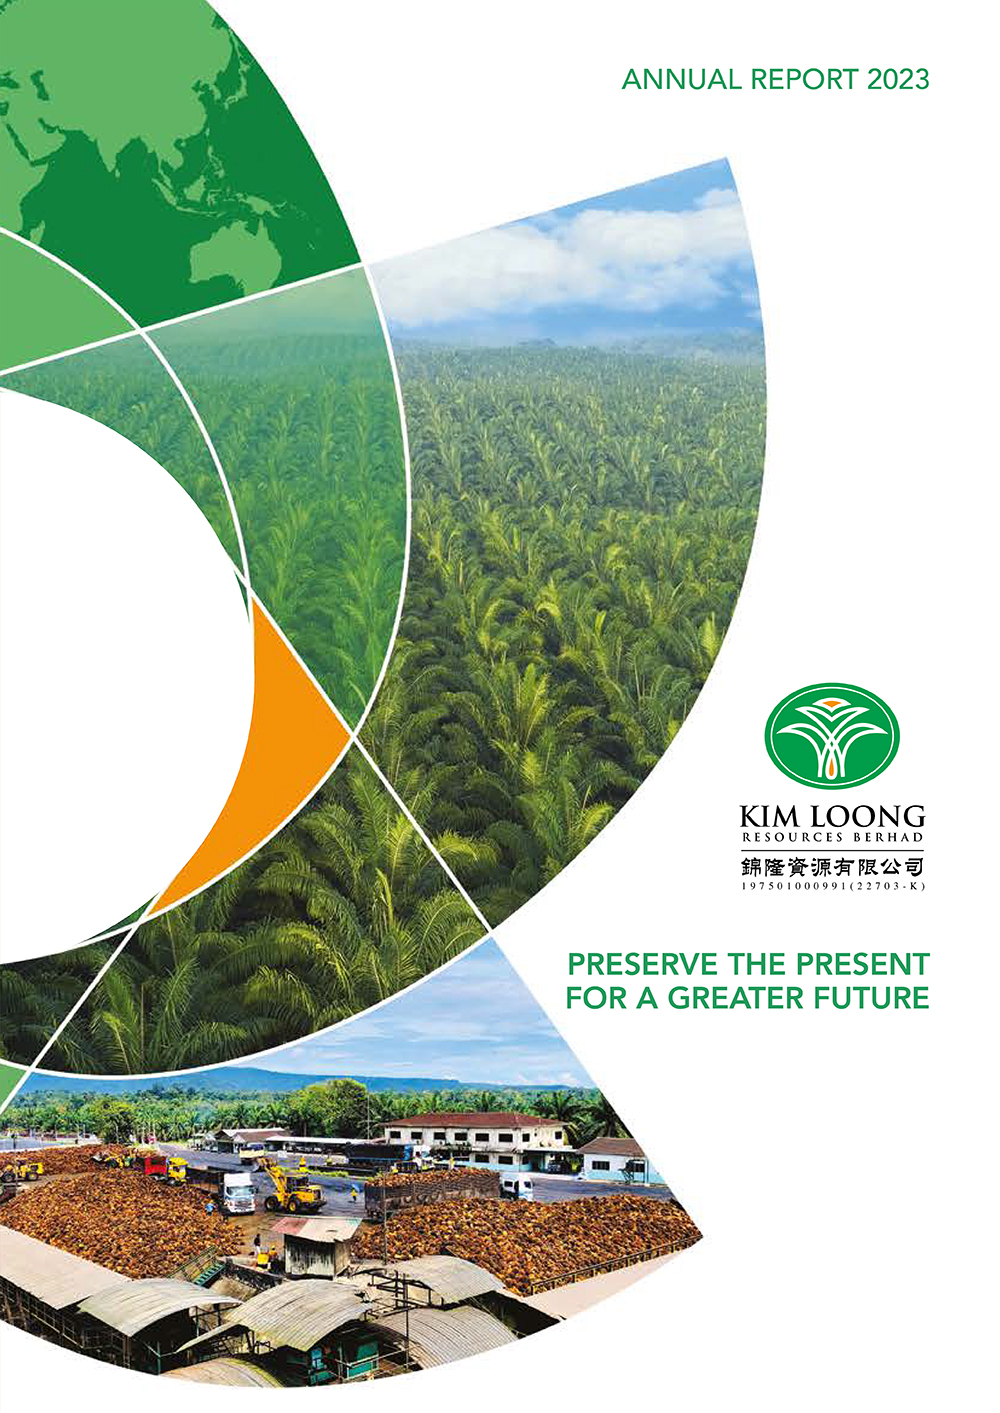 Kim Loong Resources Berhad - Annual Report Year 2023